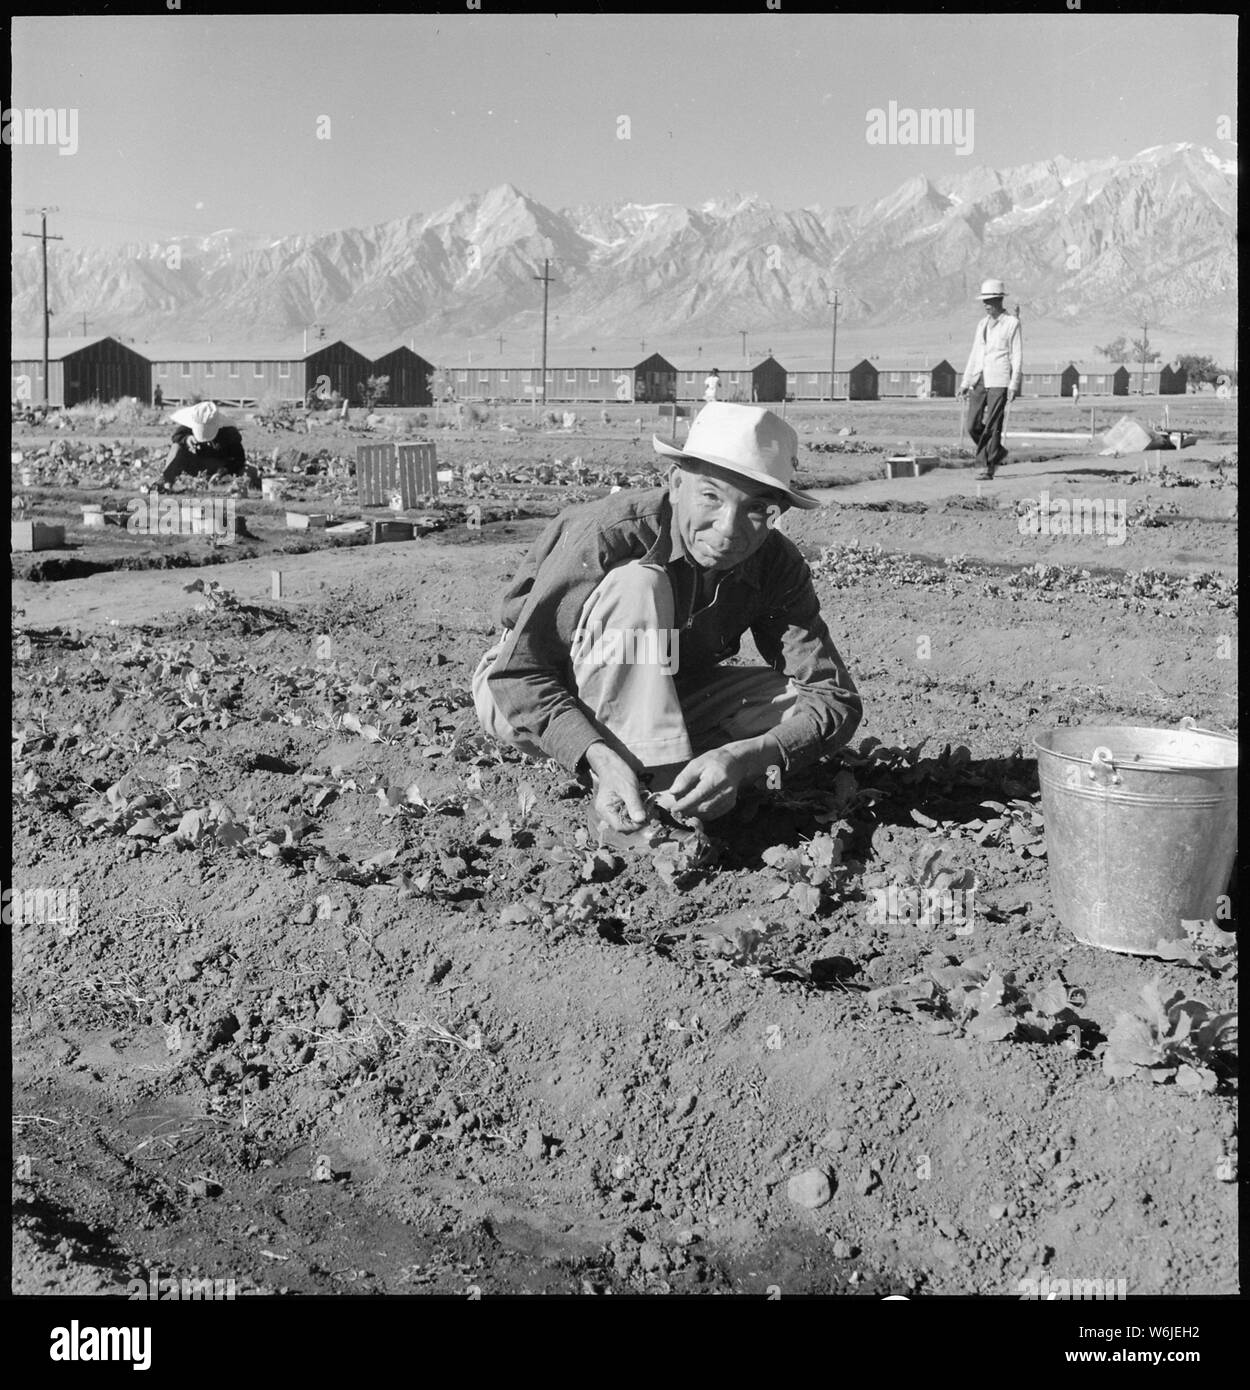 Manzanar Relocation Center, Manzanar, California. Evacuees of Japanese ancestry are growing flouris . . .; Scope and content:  The full caption for this photograph reads: Manzanar Relocation Center, Manzanar, California. Evacuees of Japanese ancestry are growing flourishing truck crops for their own use in their hobby gardens. These crops are grown in plots 10 x 50 feet between blocks of barrack at this War Relocation Authority center. Stock Photo